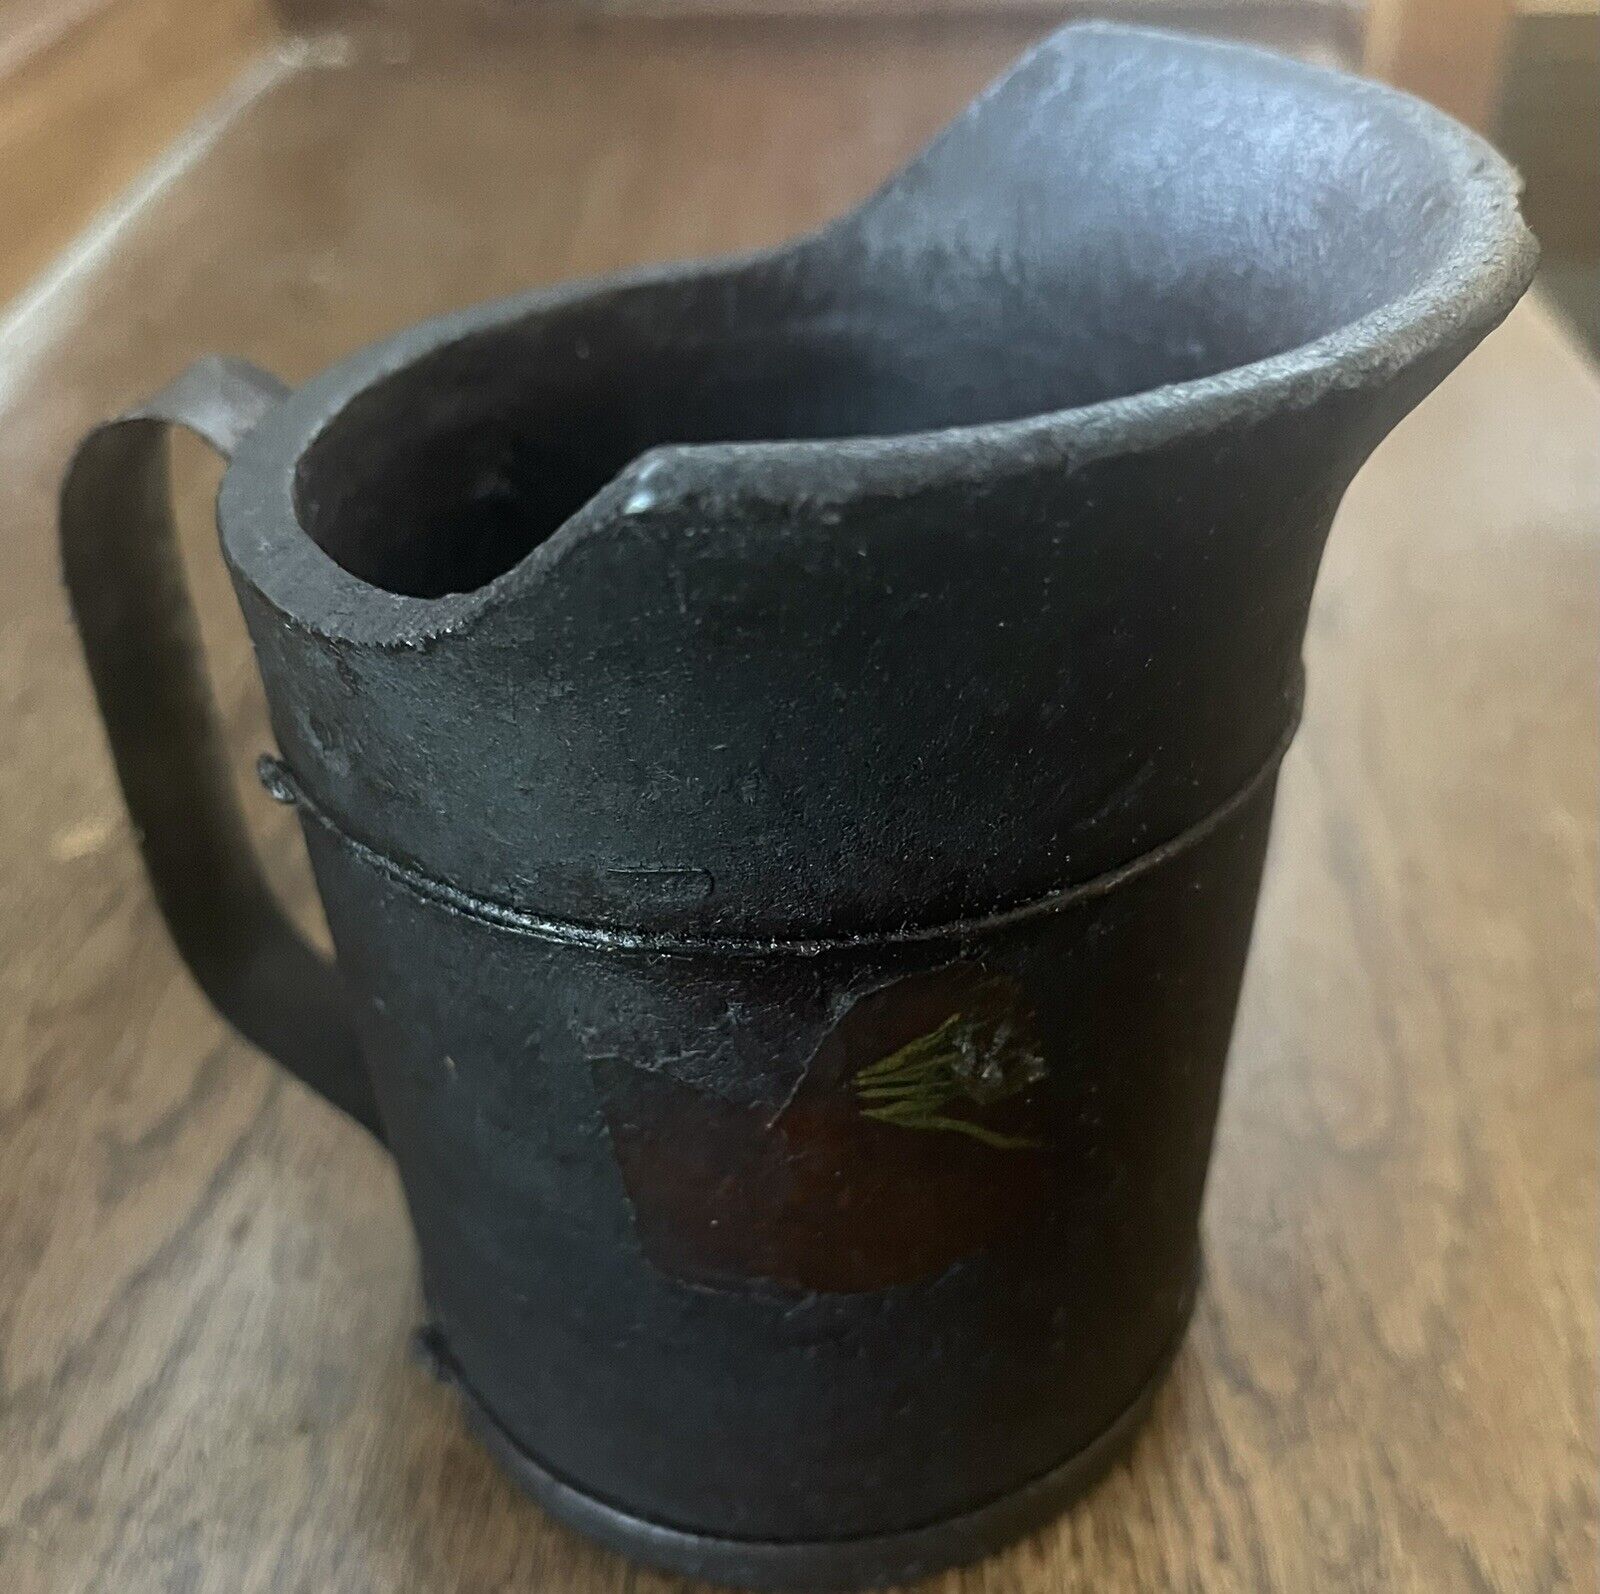 1800’s Wooden Fiber Cup Mug Pitcher Early American Antique Primitive Drink Ware